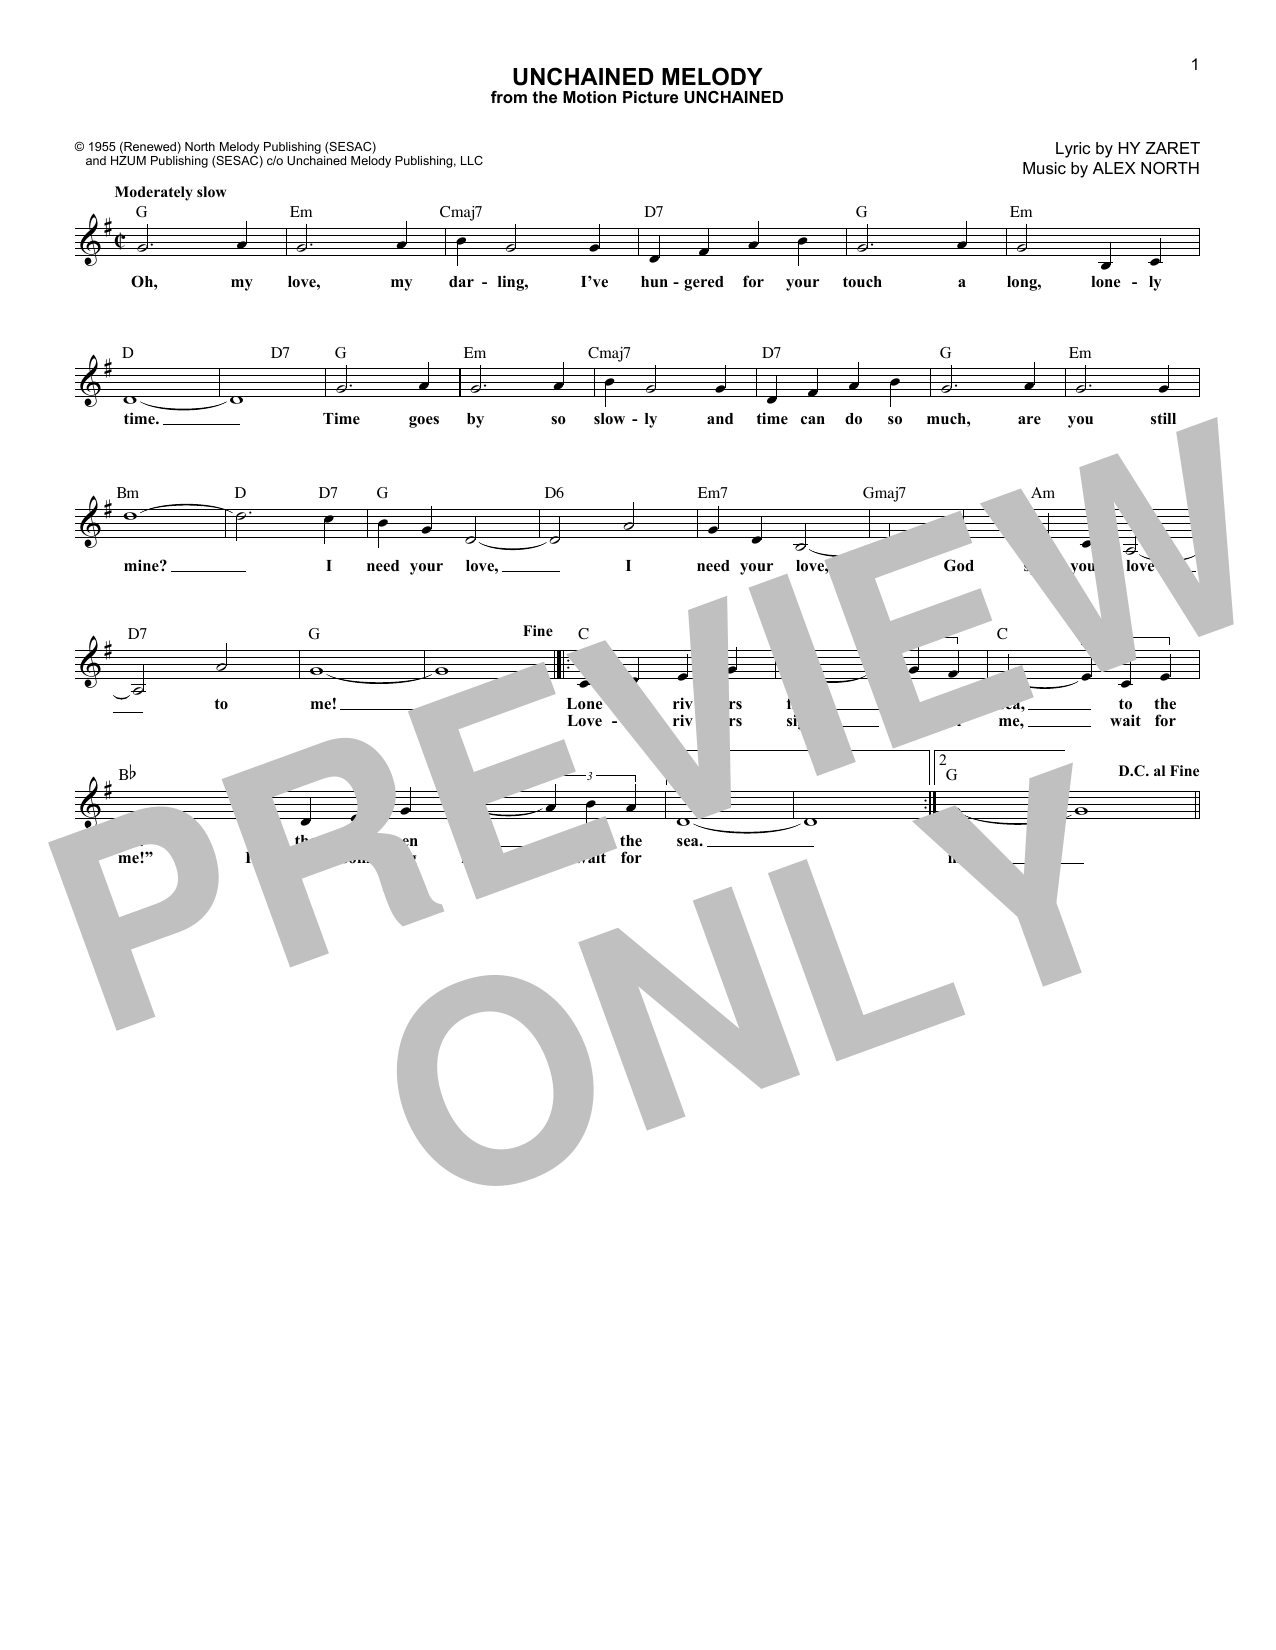 Download The Righteous Brothers Unchained Melody Sheet Music